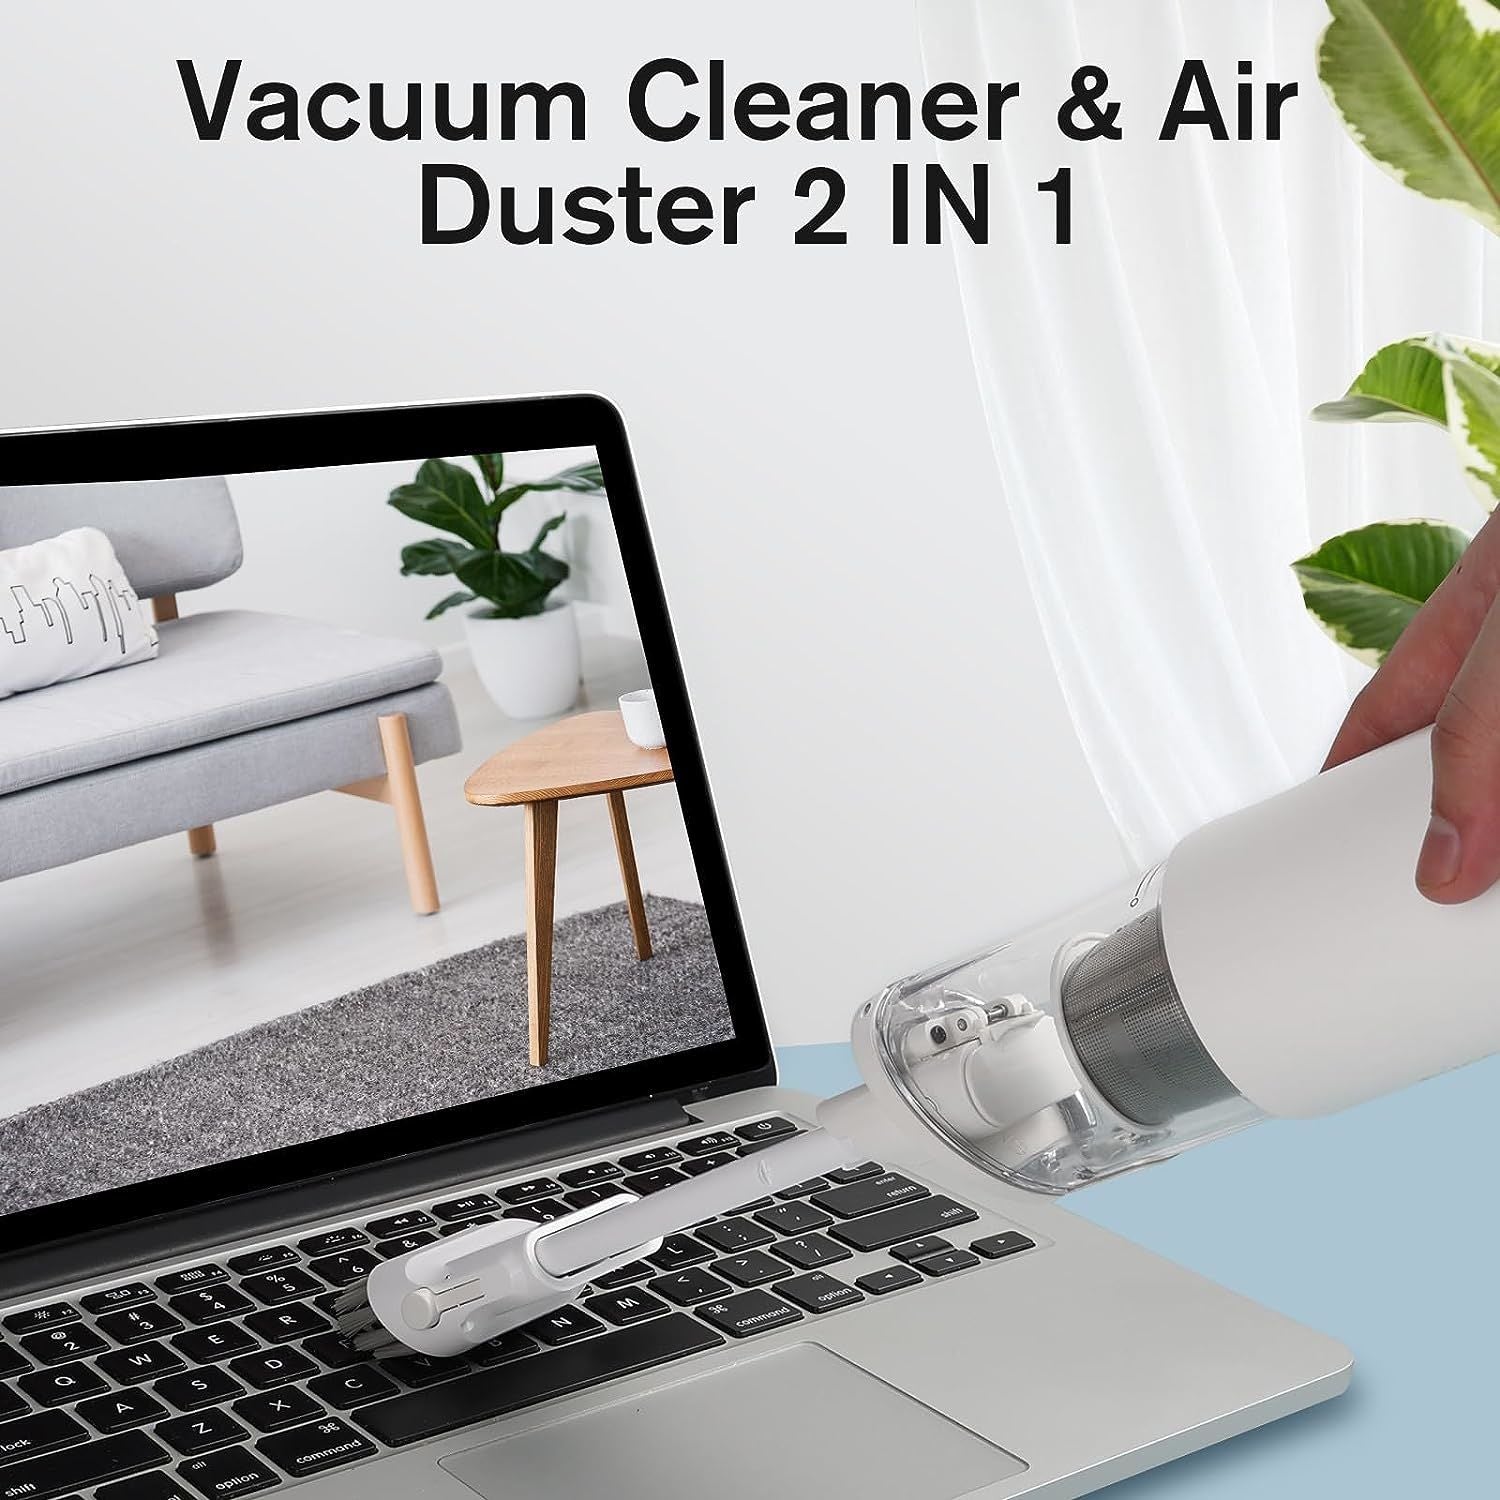 A MOOKA Cordless Car Vacuum Rechargeable, 1.1LB Lightweight Portable Mini Vacuum for Car,Home, Dual Filtration Handheld Vacuum Cleaner with Blower, 6000Pa Suction Power, USB C Fast Charging with a water hose attached to it.